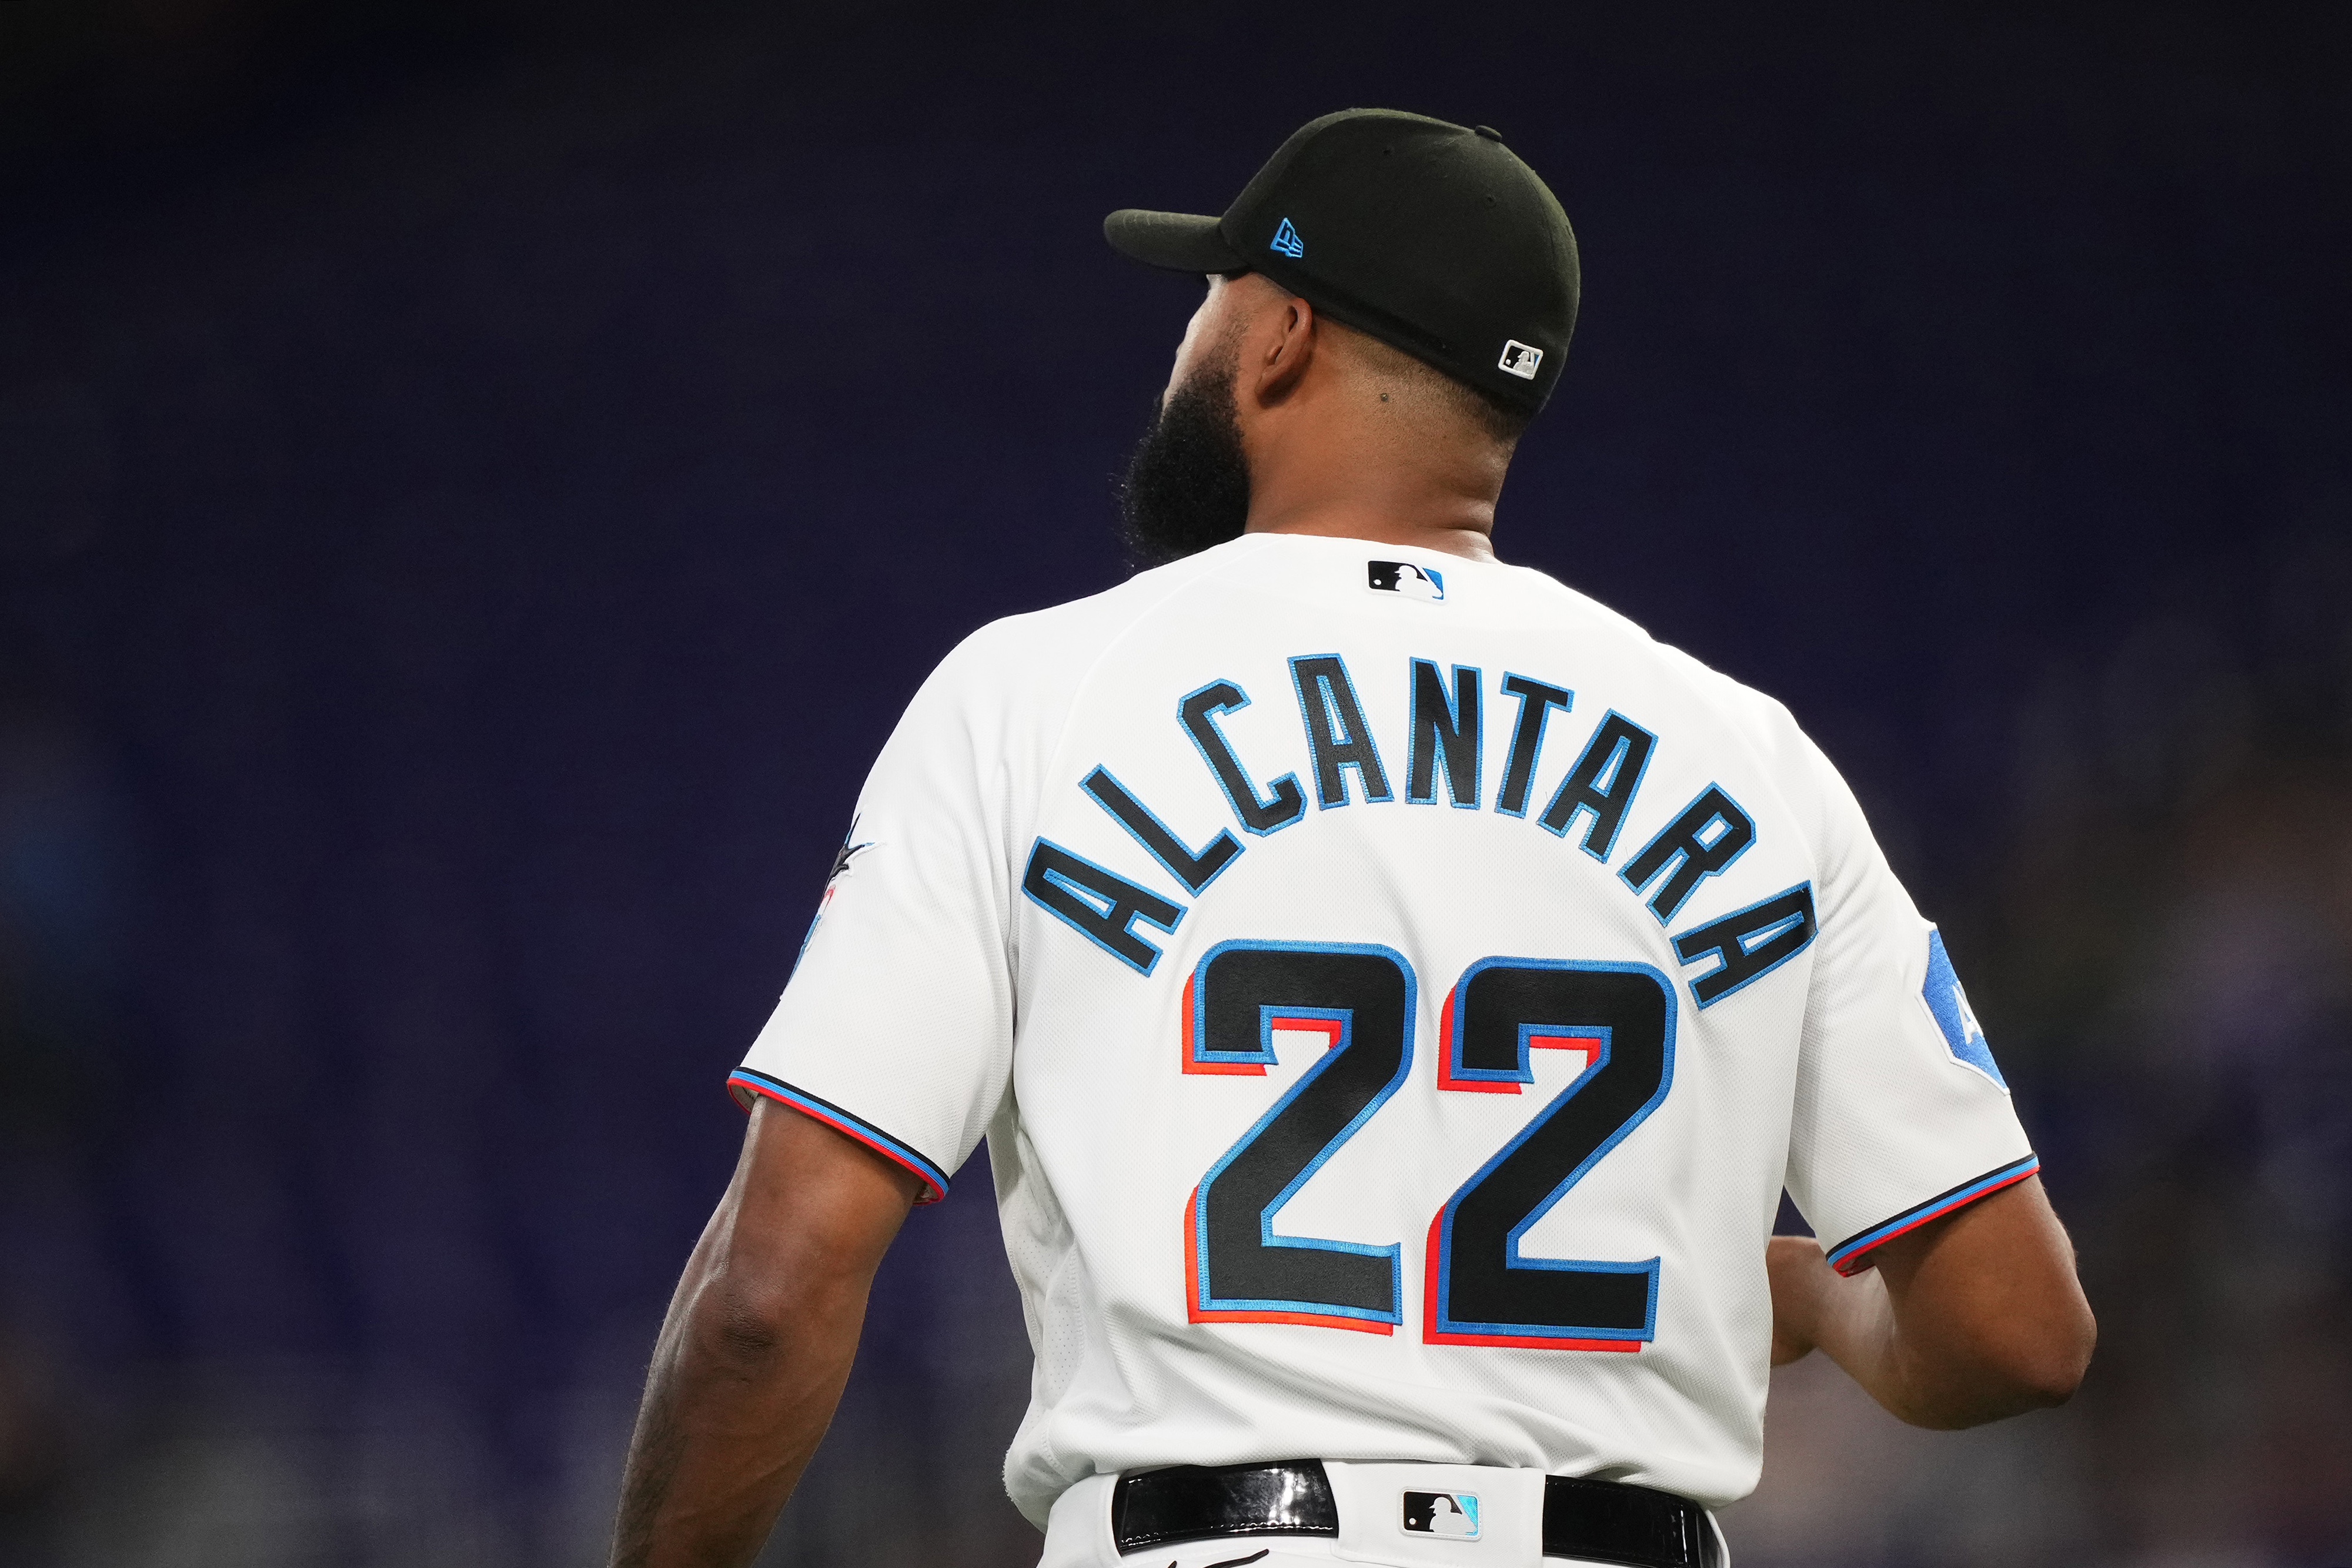 Sandy Alcantara #22 of the Miami Marlins takes the mound for the game against the Atlanta Braves at loanDepot park on May 2, 2023 in Miami, Florida.